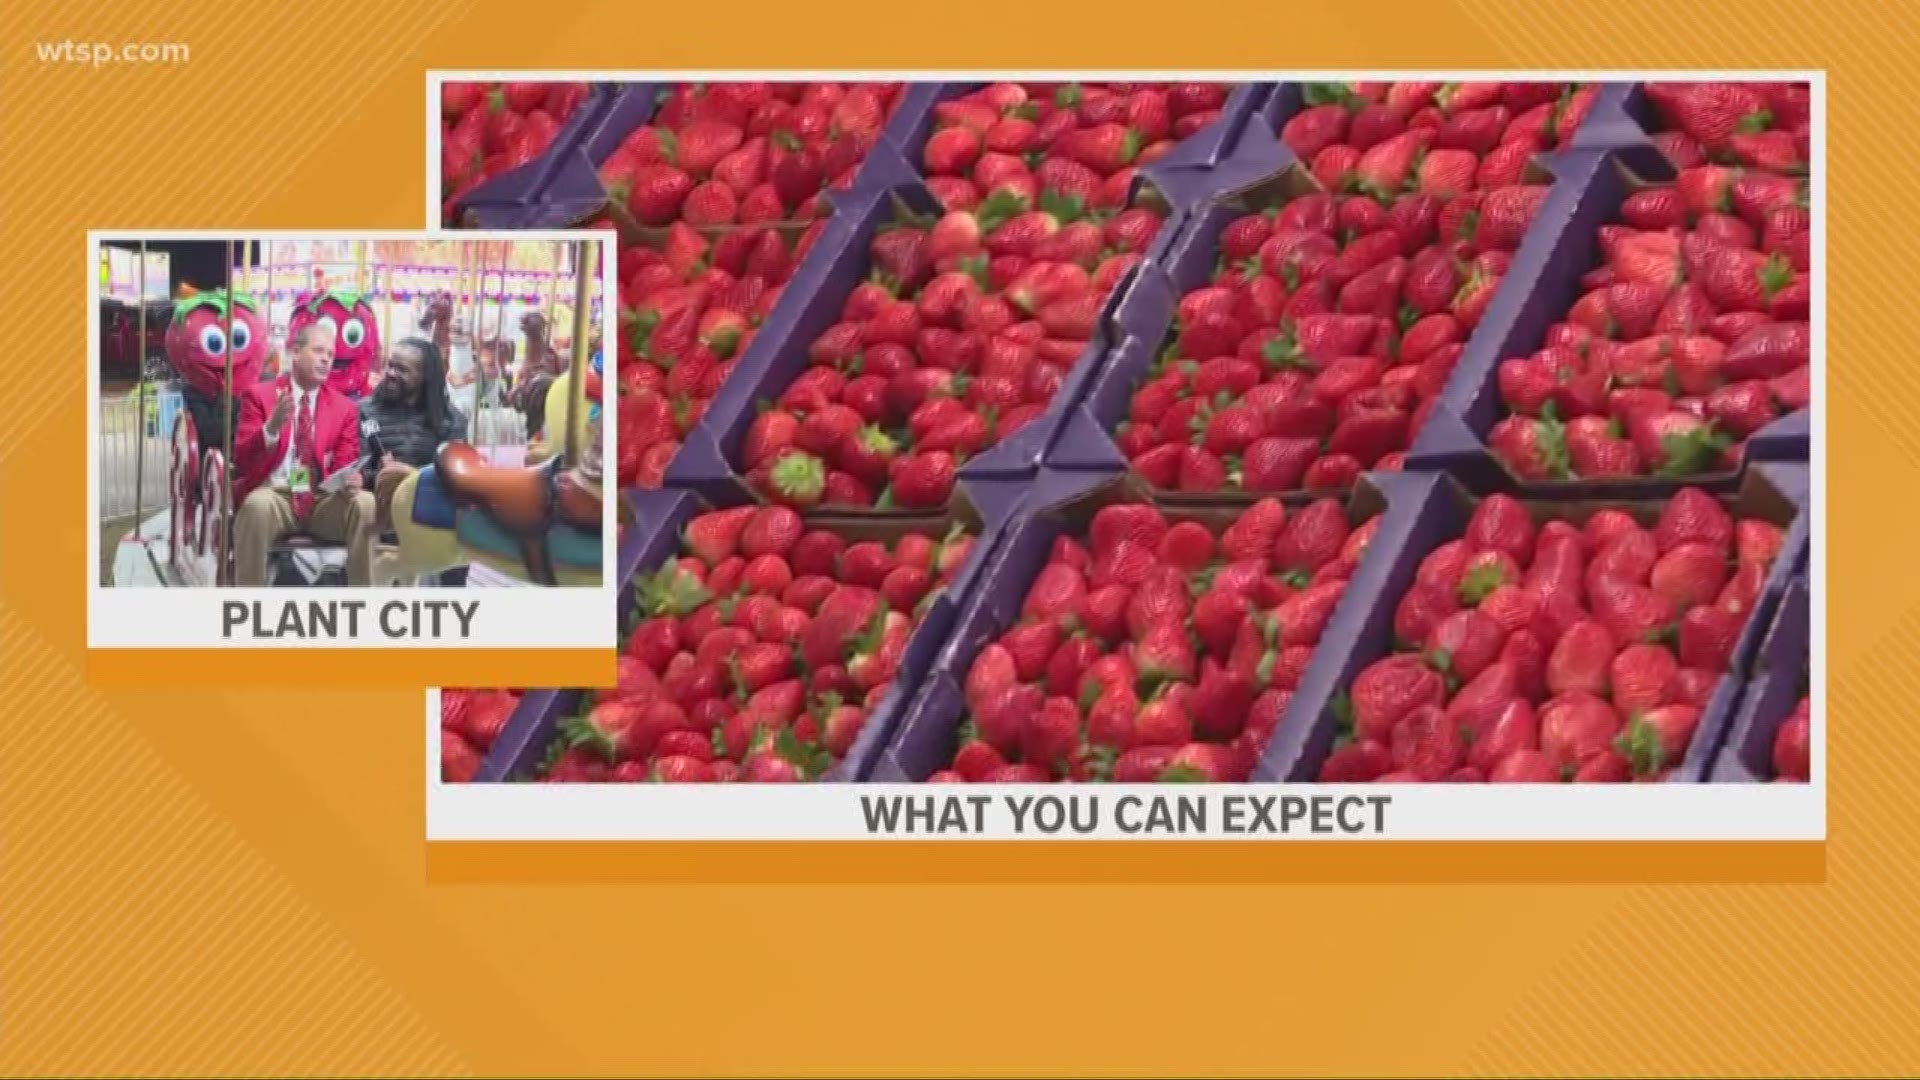 Jabari Thomas is in Plant City to preview this year's Strawberry Festival.